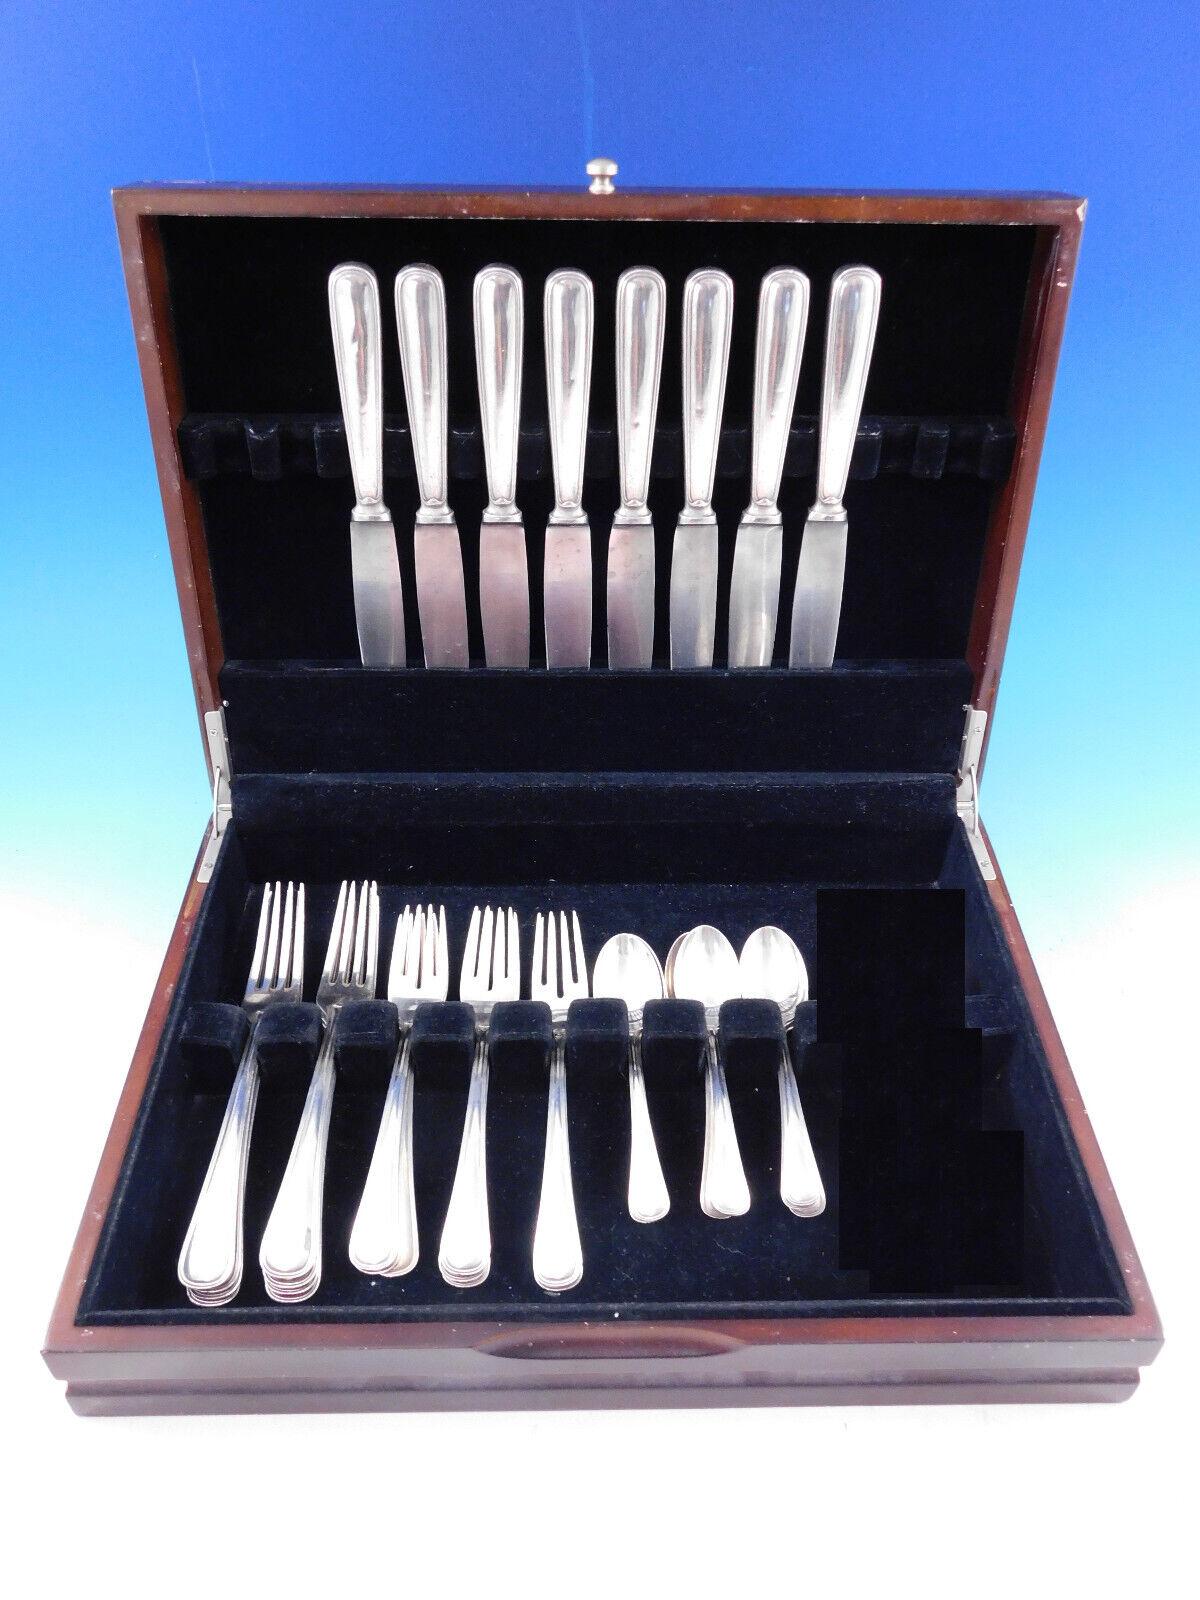 Buccellati is known and admired throughout the world for producing the finest quality Italian silver.

Old Italian by Buccellati Italy Sterling Silver Flatware set - 32 pieces. This set includes:

8 Dinner Size Knives, 9 1/2